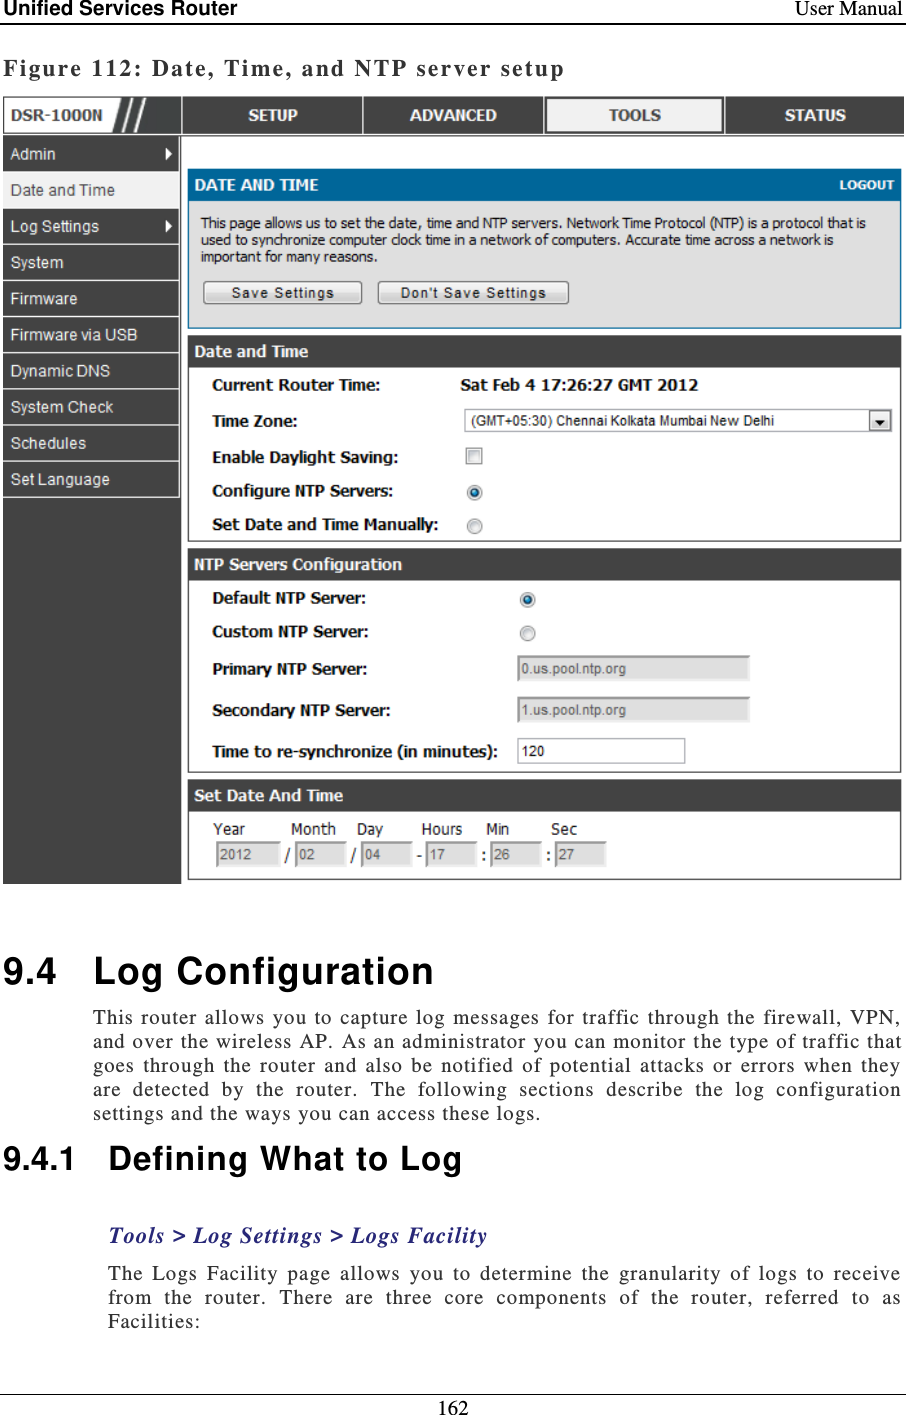 Unified Services Router    User Manual 162  Figure 112:  Date, Time, and NTP server setup    9.4  Log Configuration This router allows  you  to  capture  log  messages  for  traffic through  the  firewall, VPN, and over the wireless AP. As an administrator you can monitor t he type of traffic that goes  through  the  router  and  also  be  notified  of  potential  attacks  or  errors  when  they are  detected  by  the  router.  The  following  sections  describe  the  log  configuration settings and the ways you can access these logs.   9.4.1  Defining What to Log Tools &gt; Log Settings &gt; Logs Facility The  Logs  Facility  page  allows  you  to  determine  the  granularity  of  logs  to  receive from  the  router.  There  are  three  core  components  of  the  router,  referred  to  as Facilities: 